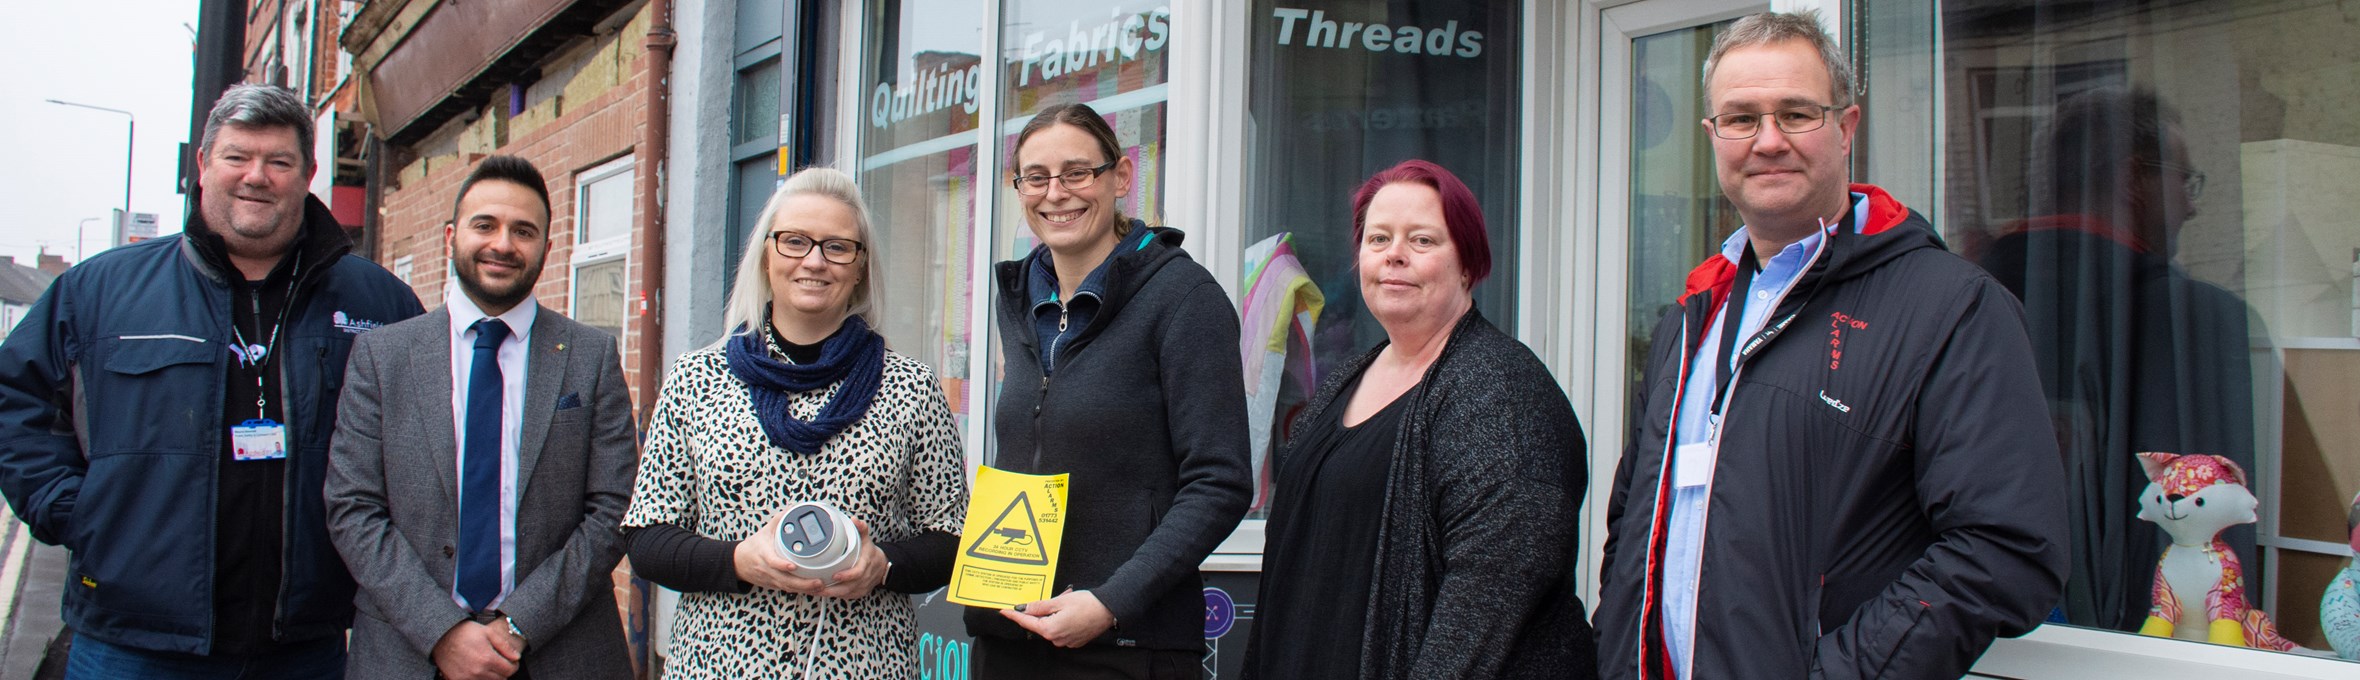 Cllr Helen-Ann Smith with others outside Sewilicious Fabrics on Outram Street